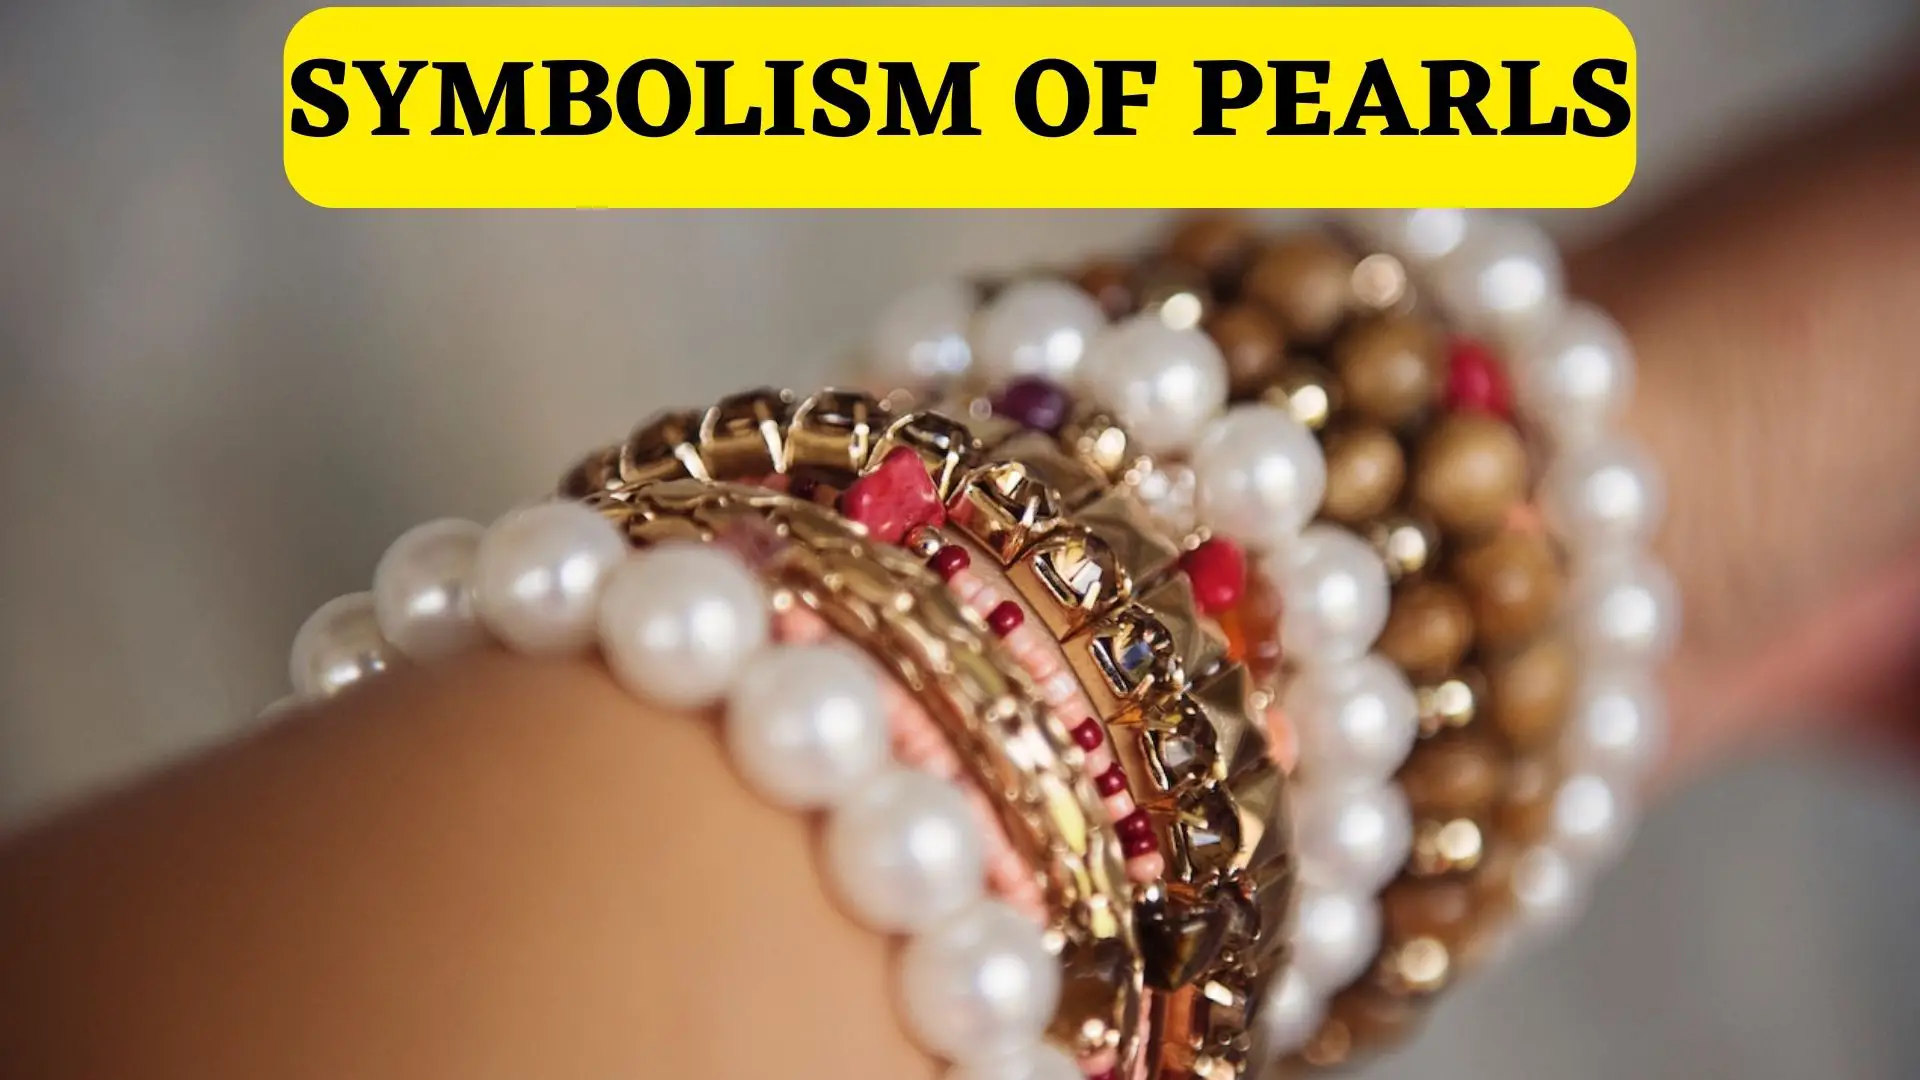 Dreams About Pearls: Positive Meanings